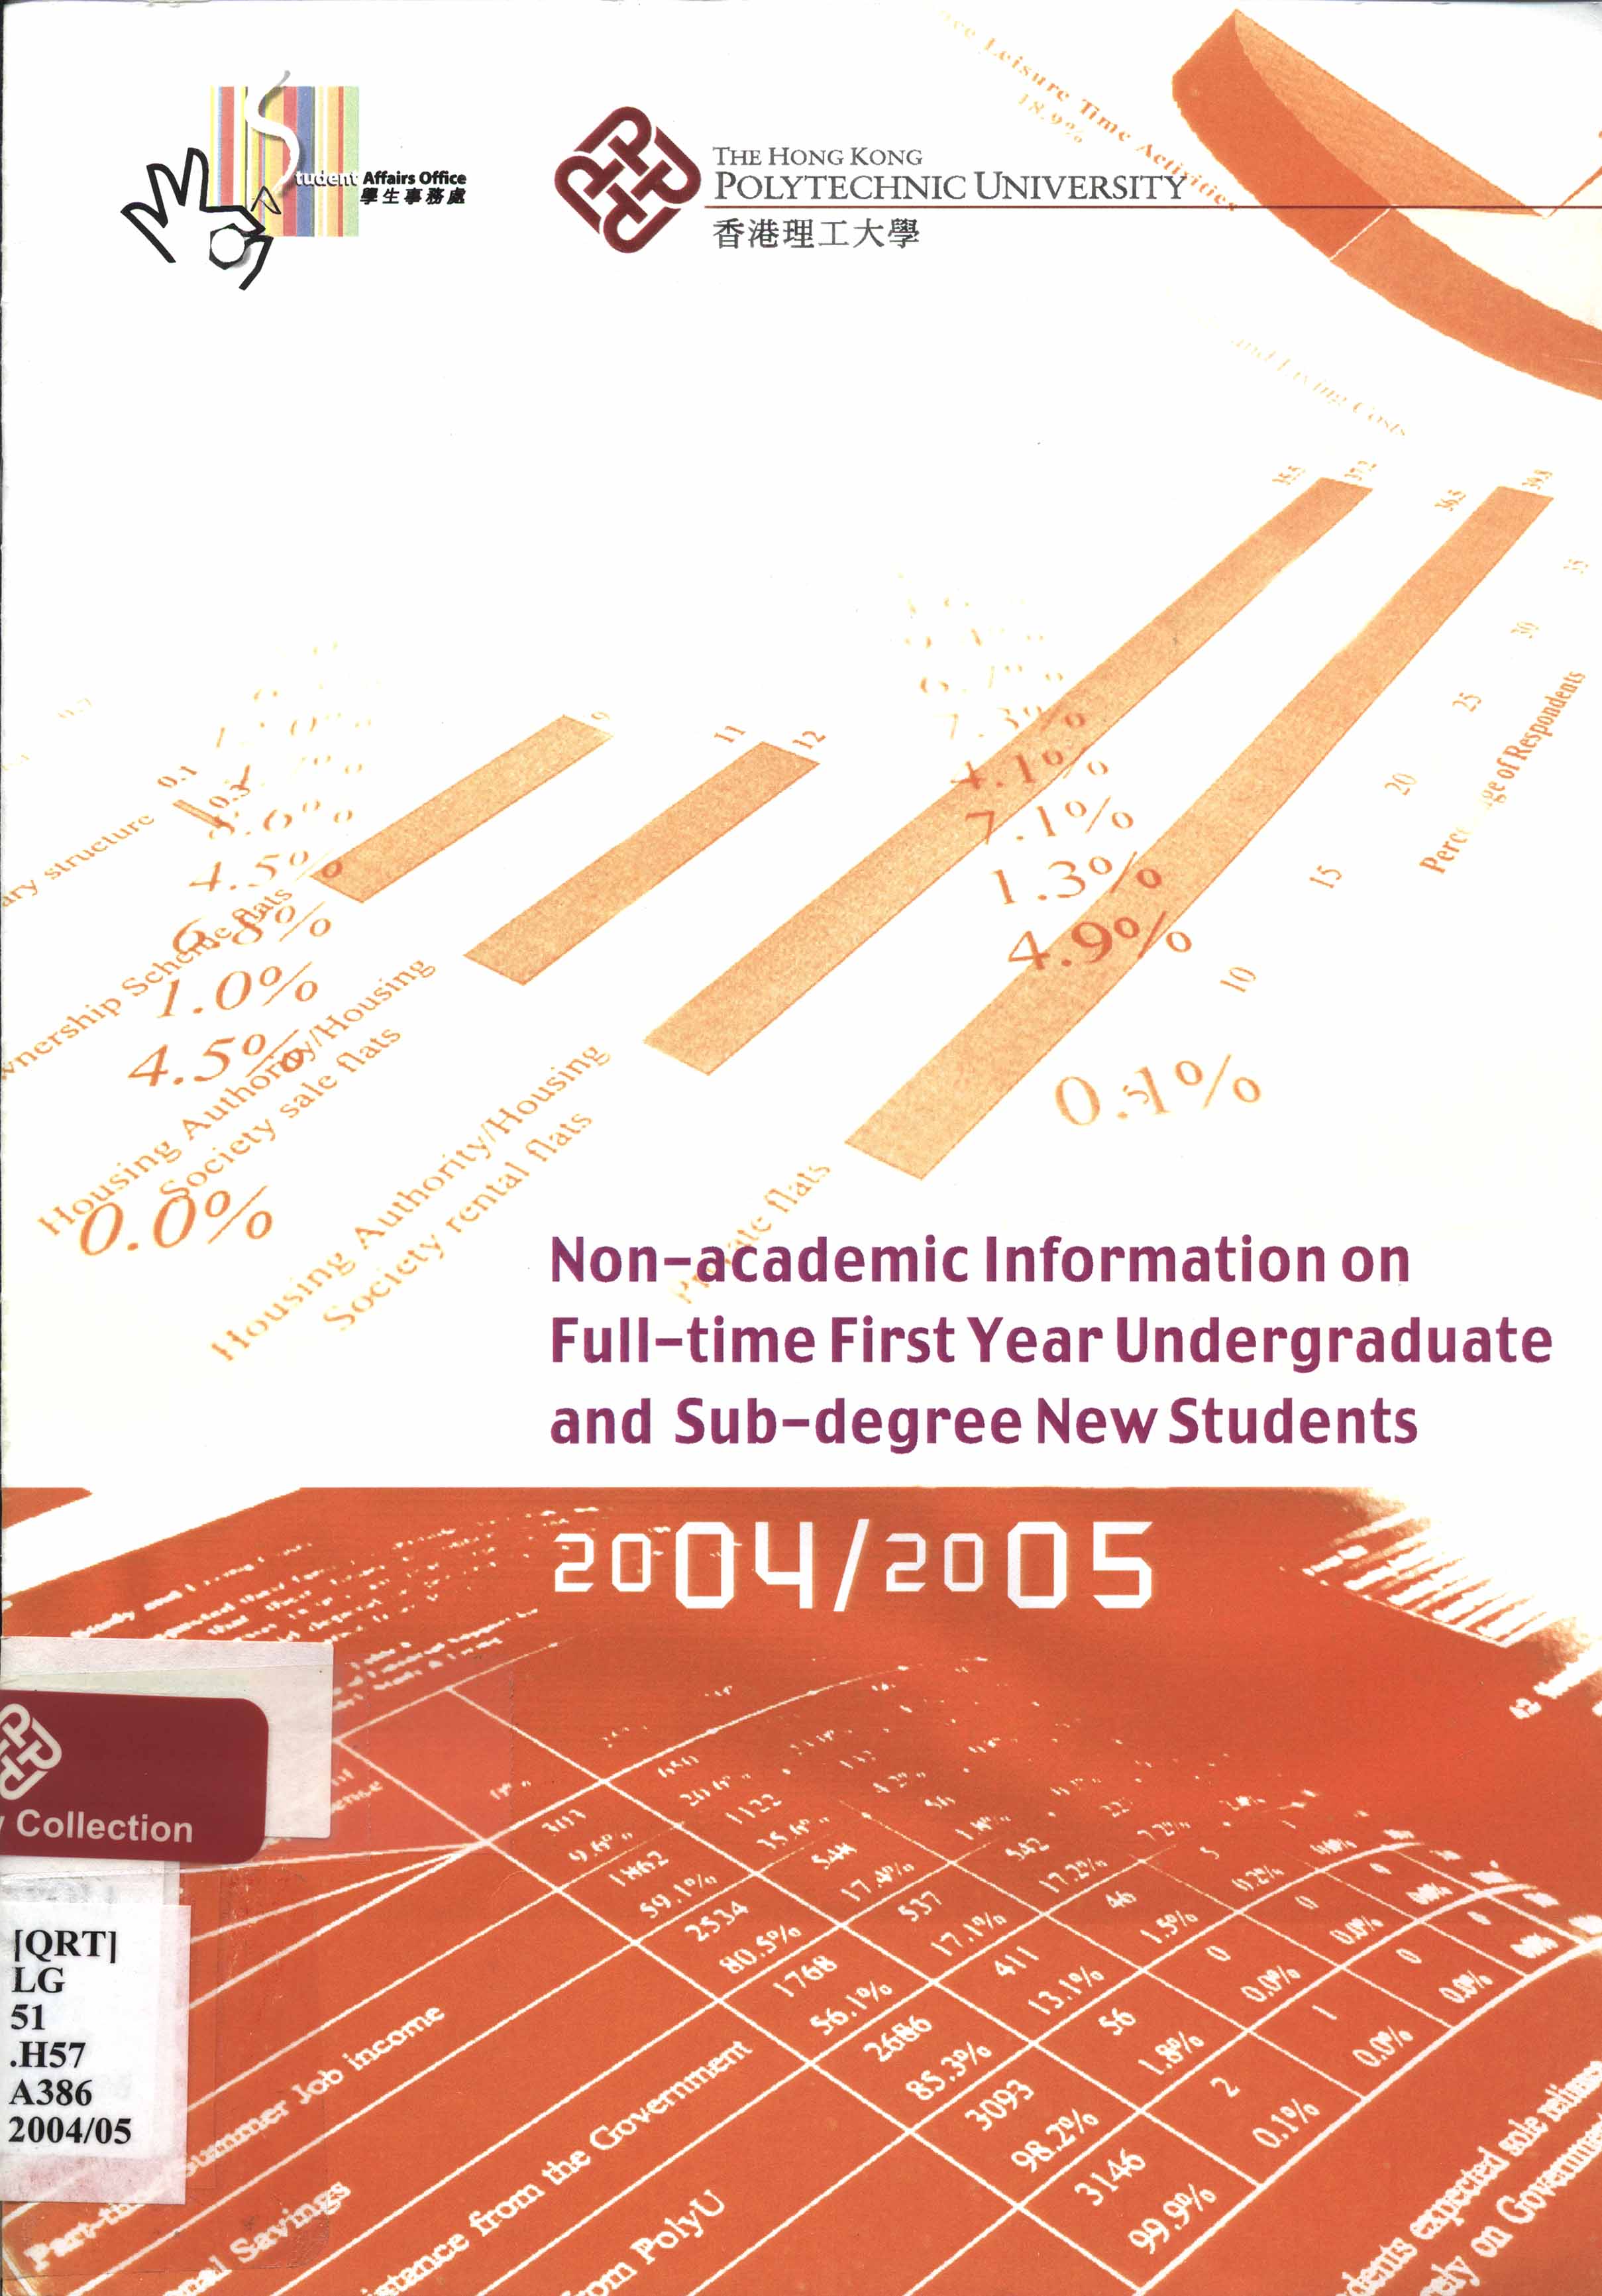 Non-academic information on full-time first year undergraduate and sub-degree new students [2004/2005]